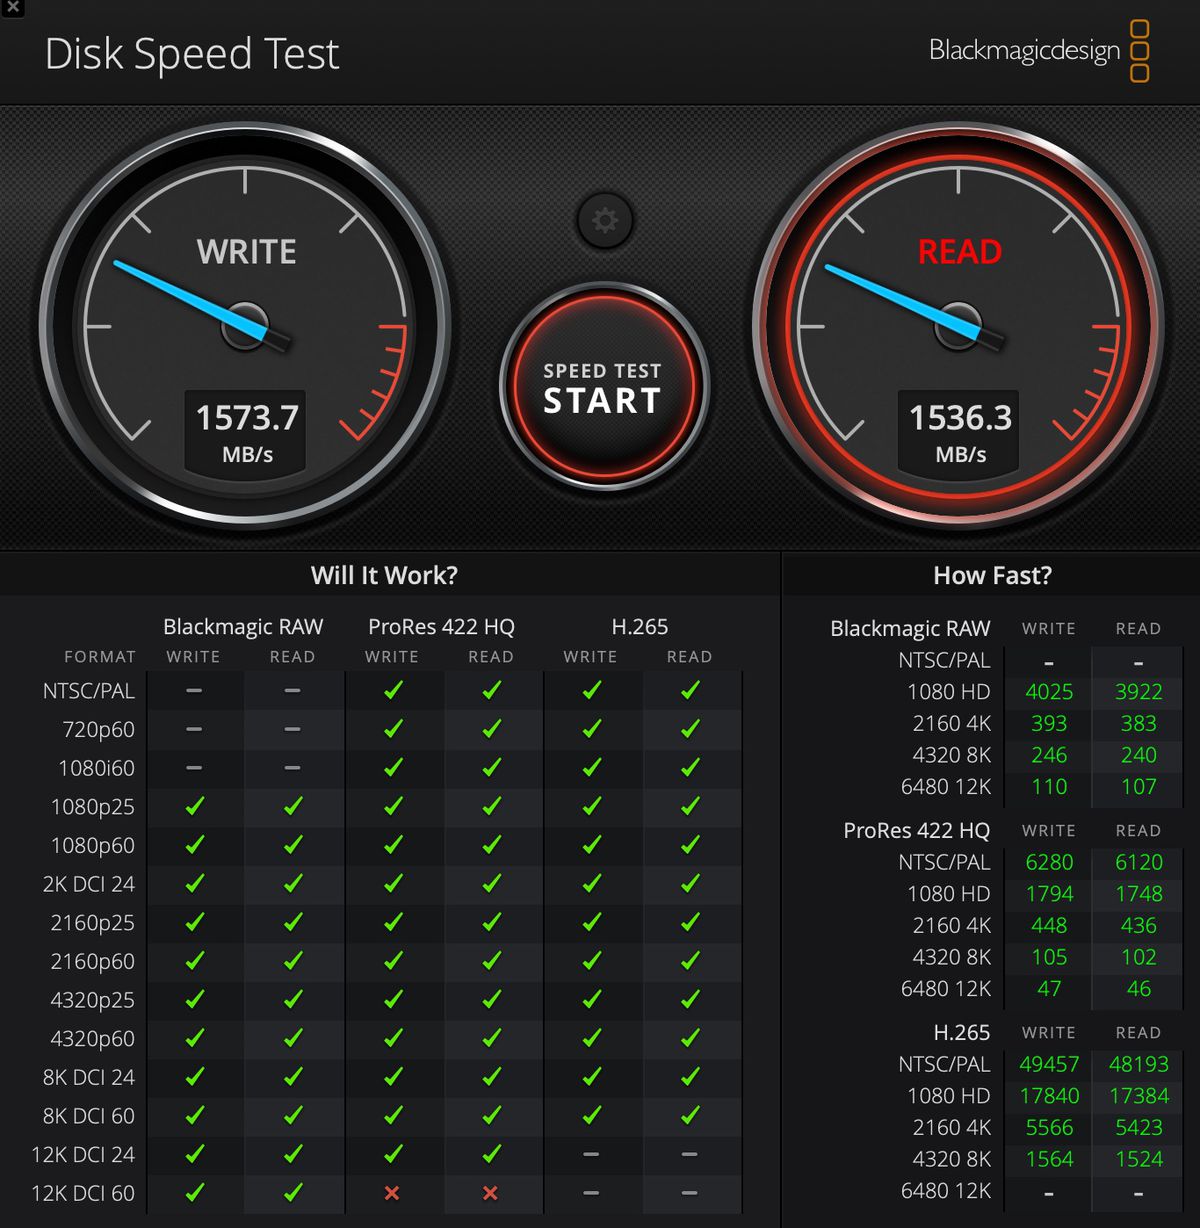 A screenshot of the Blackmagic Disk Speed ​​Test indicating scores of 1537.7 for writing and 1536.3 for reading.